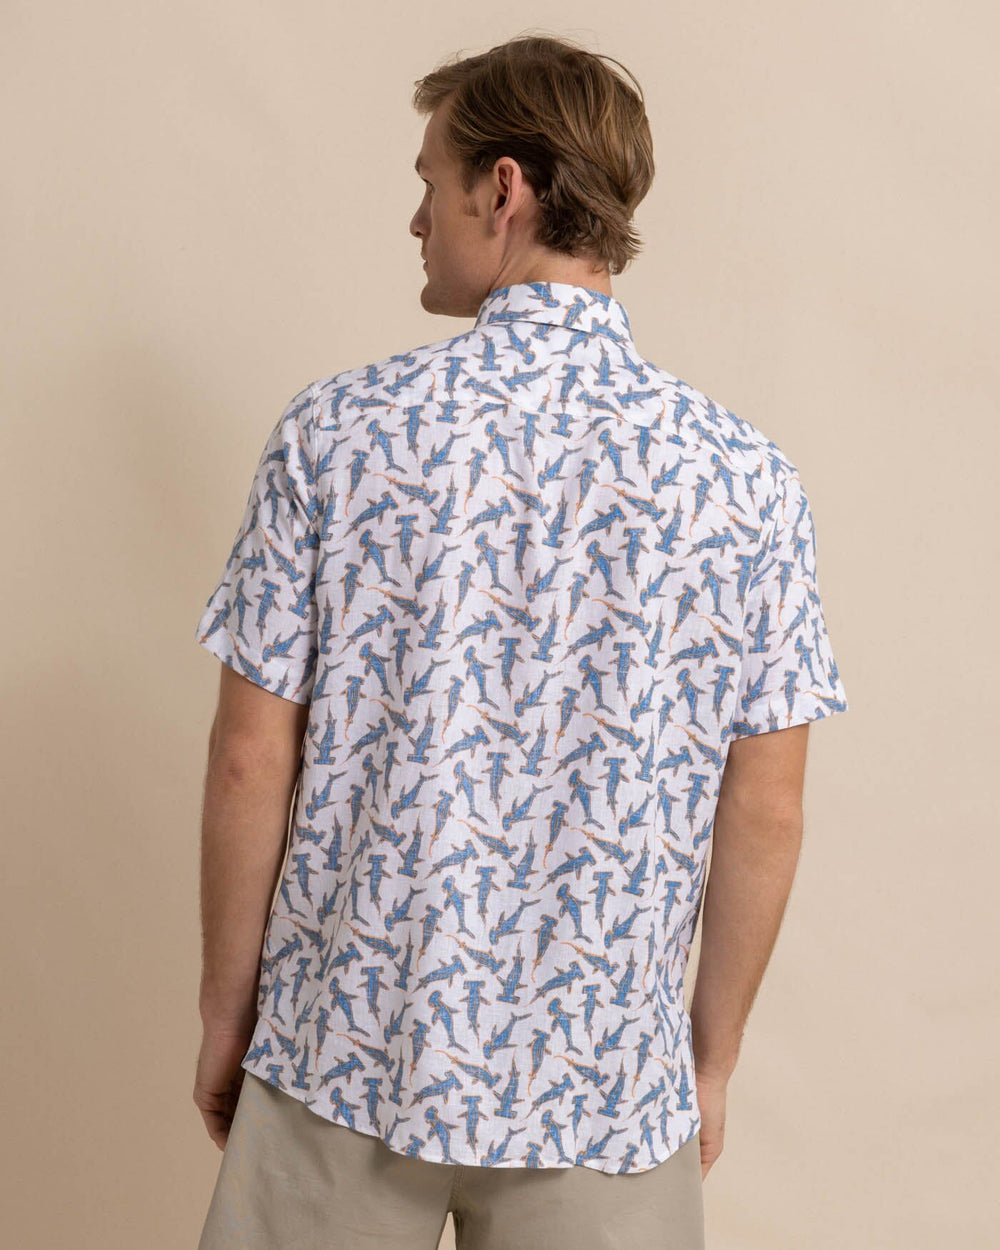 The back view of the Southern Tide Nailed It Linen Rayon Short Sleeve Sport Shirt by Southern Tide - Classic White